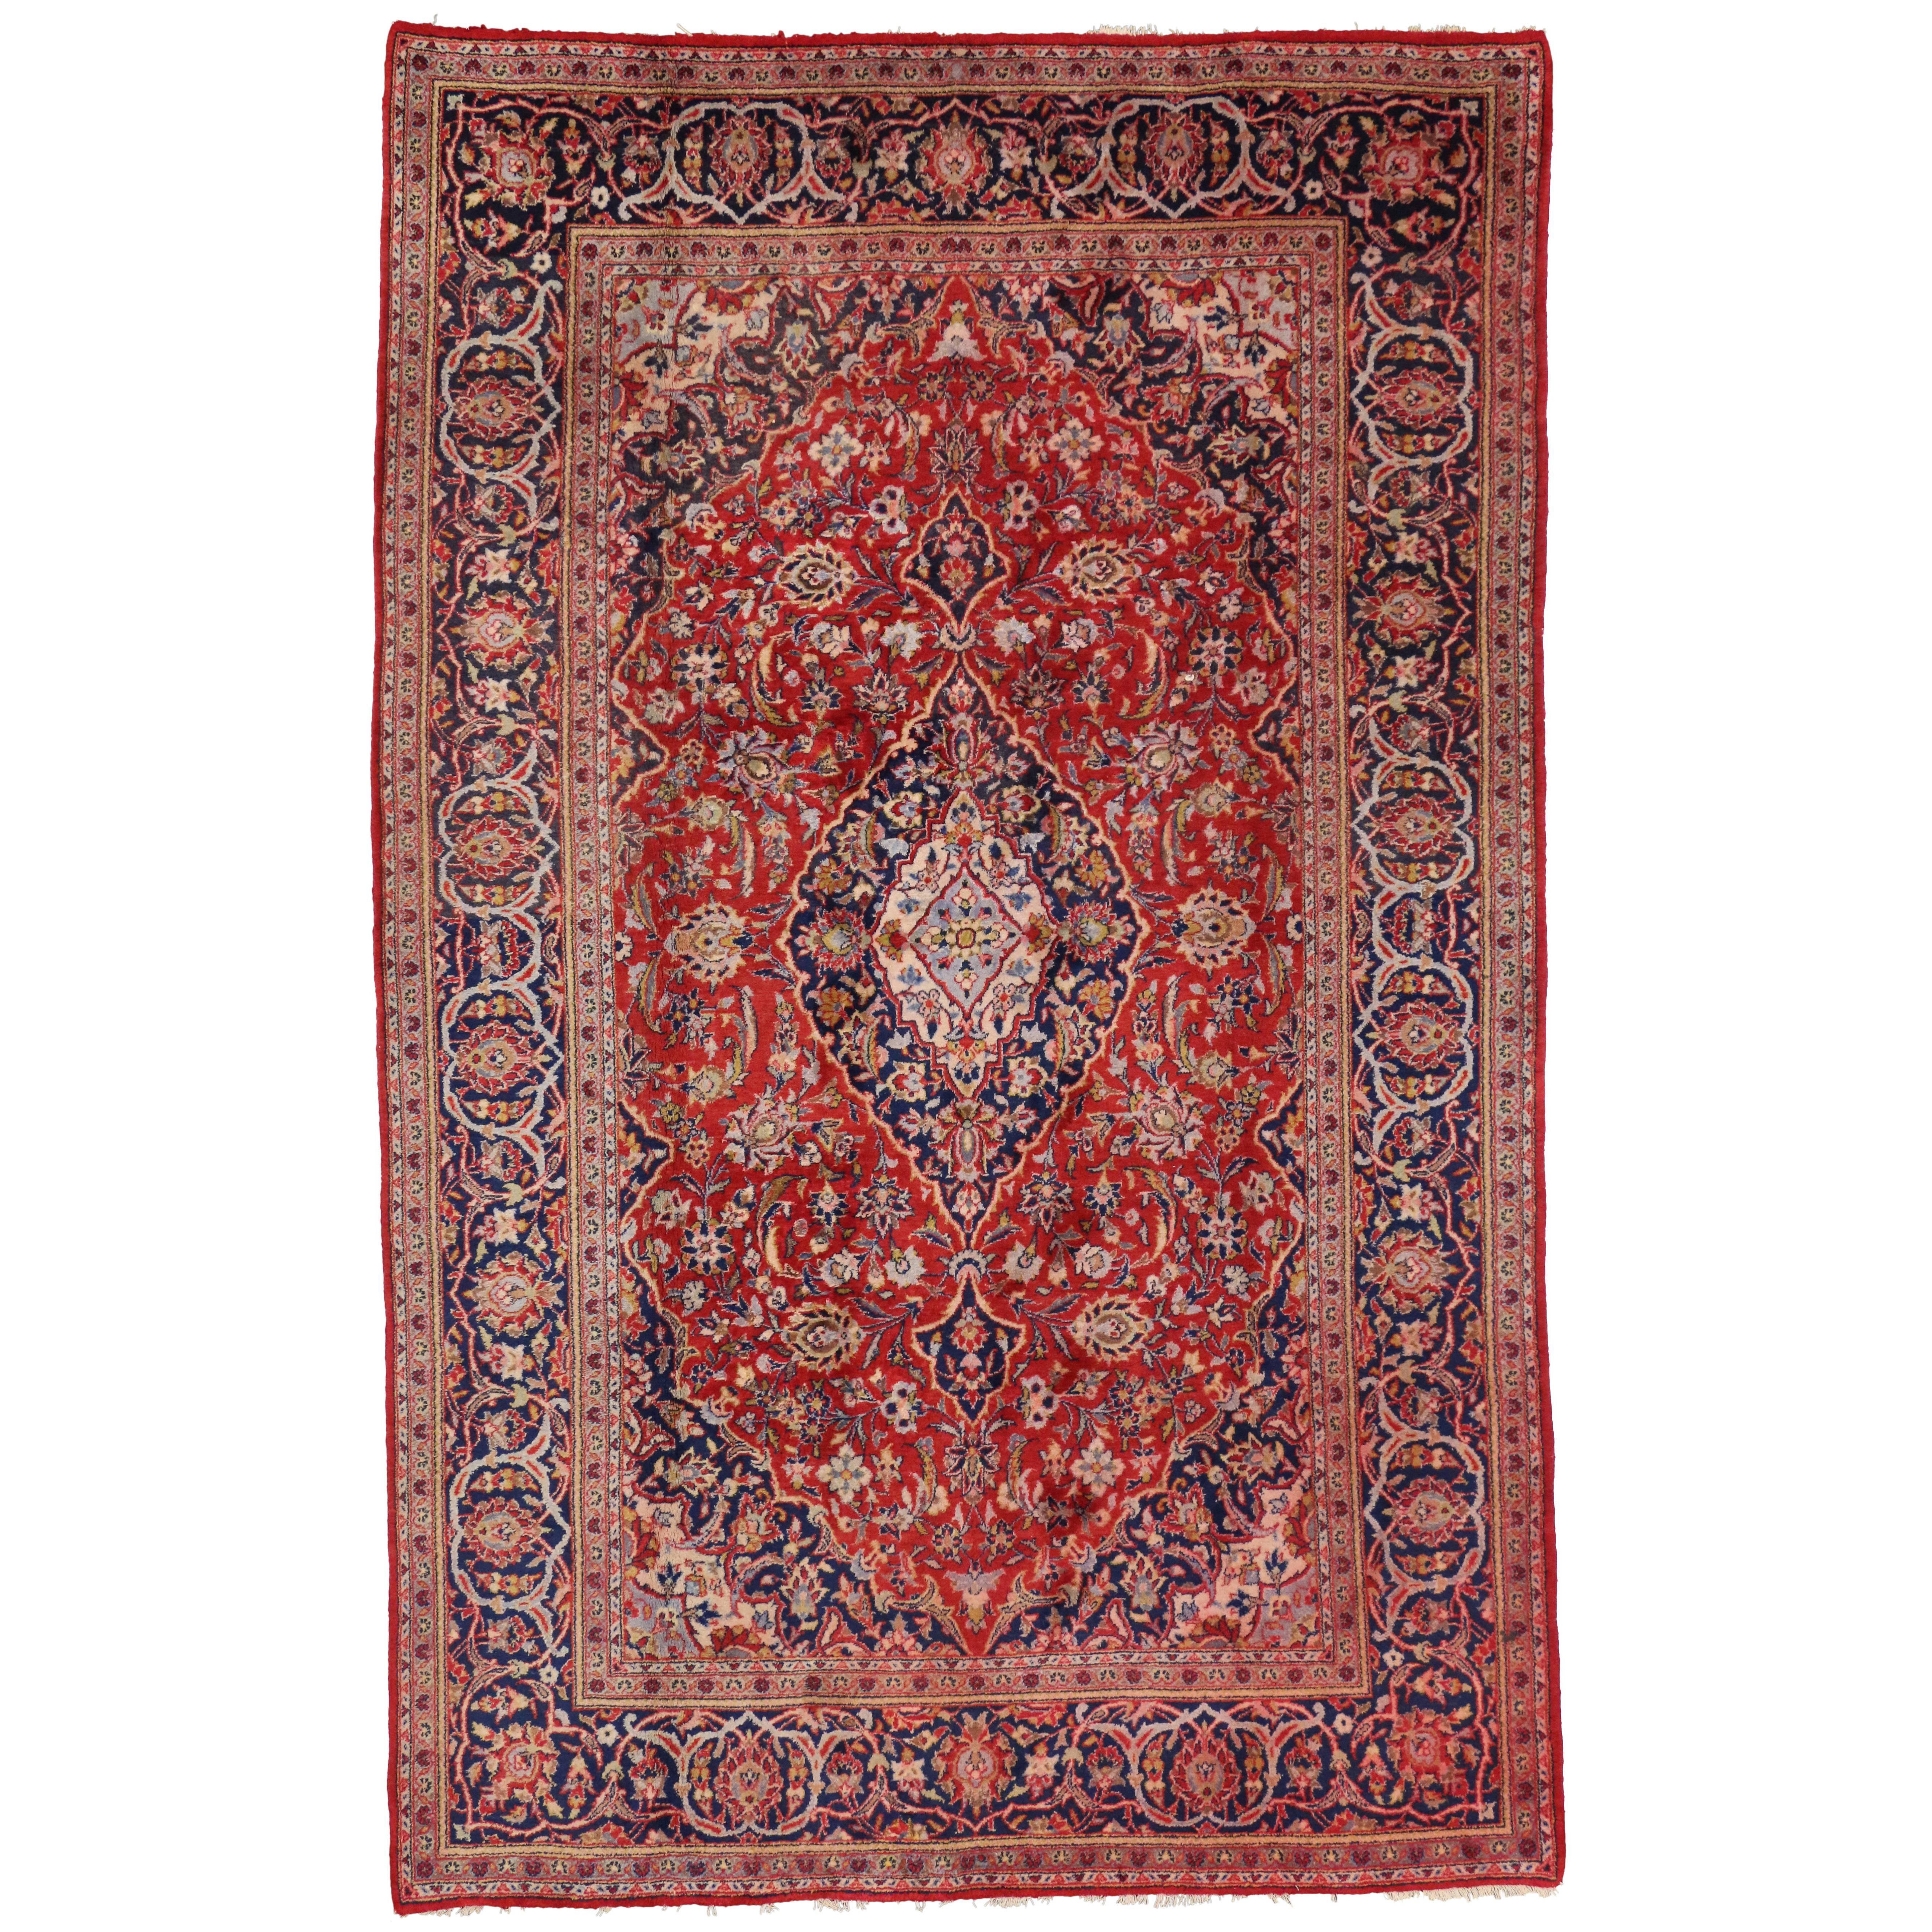 Vintage Persian Kashan Rug with Traditional Colonial and Federal Style